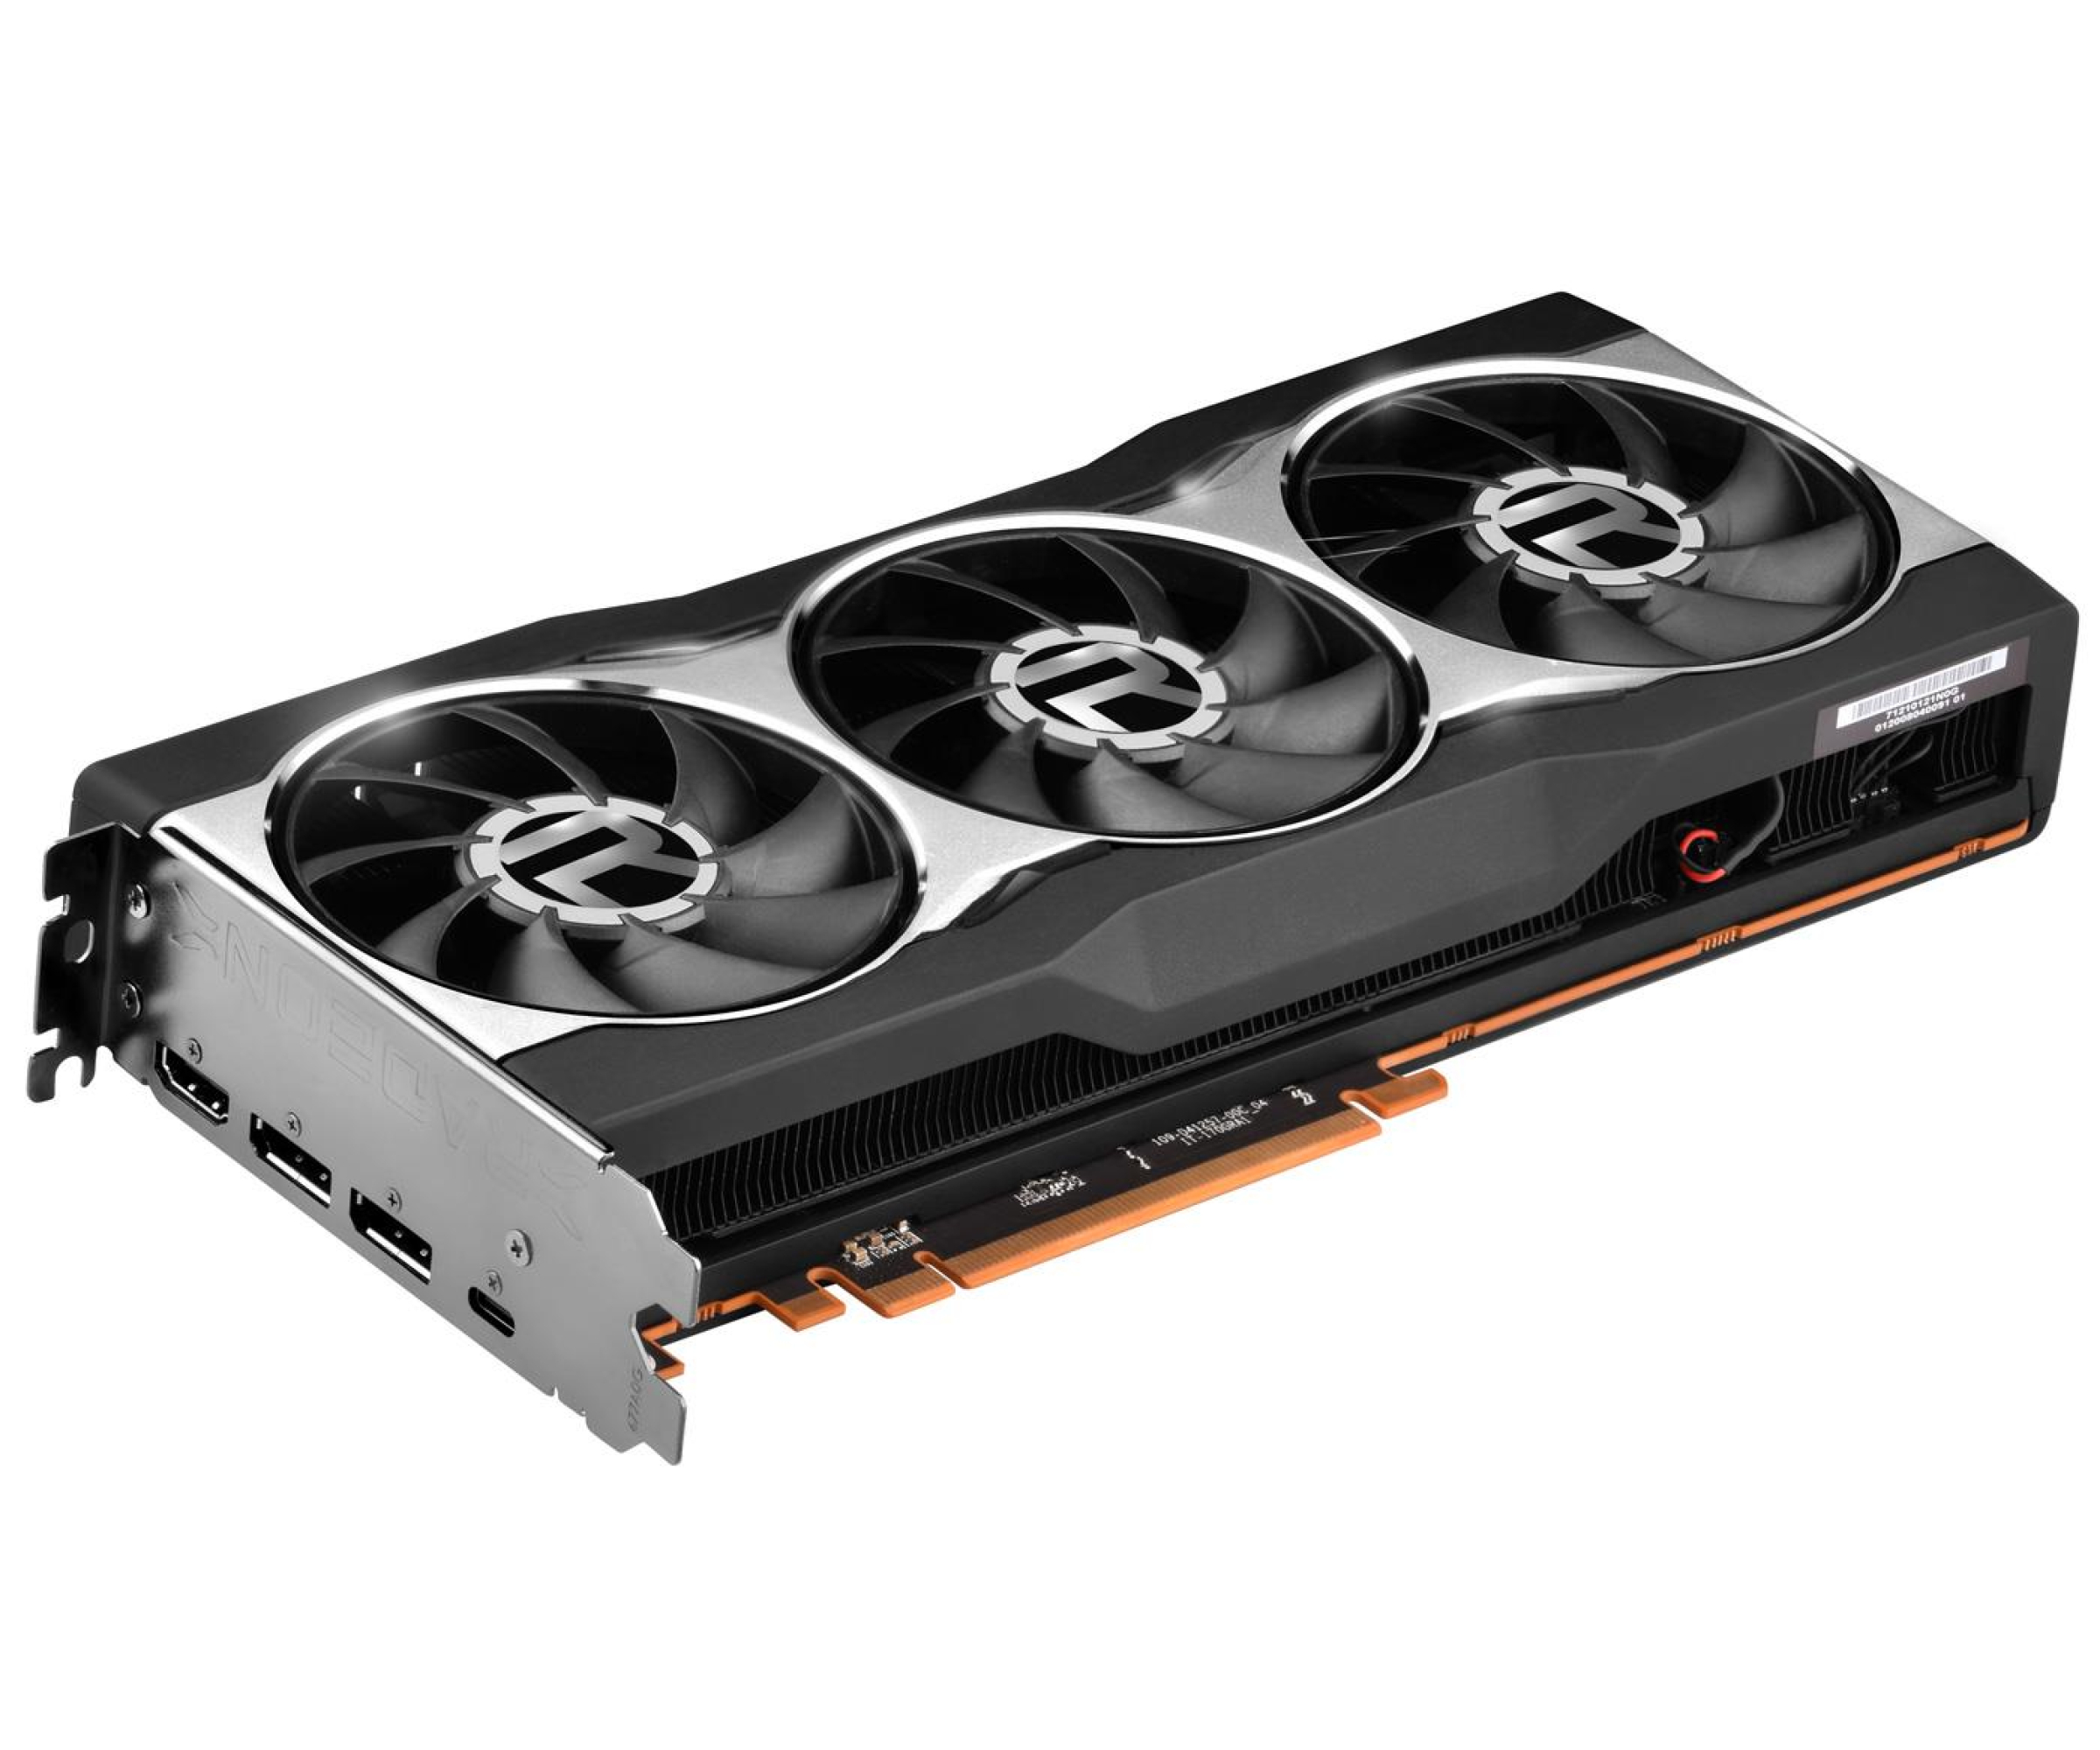 AMD Radeon RX6800 16 GB GDDR6 (reference RX 6800) - MacVidCards Europe